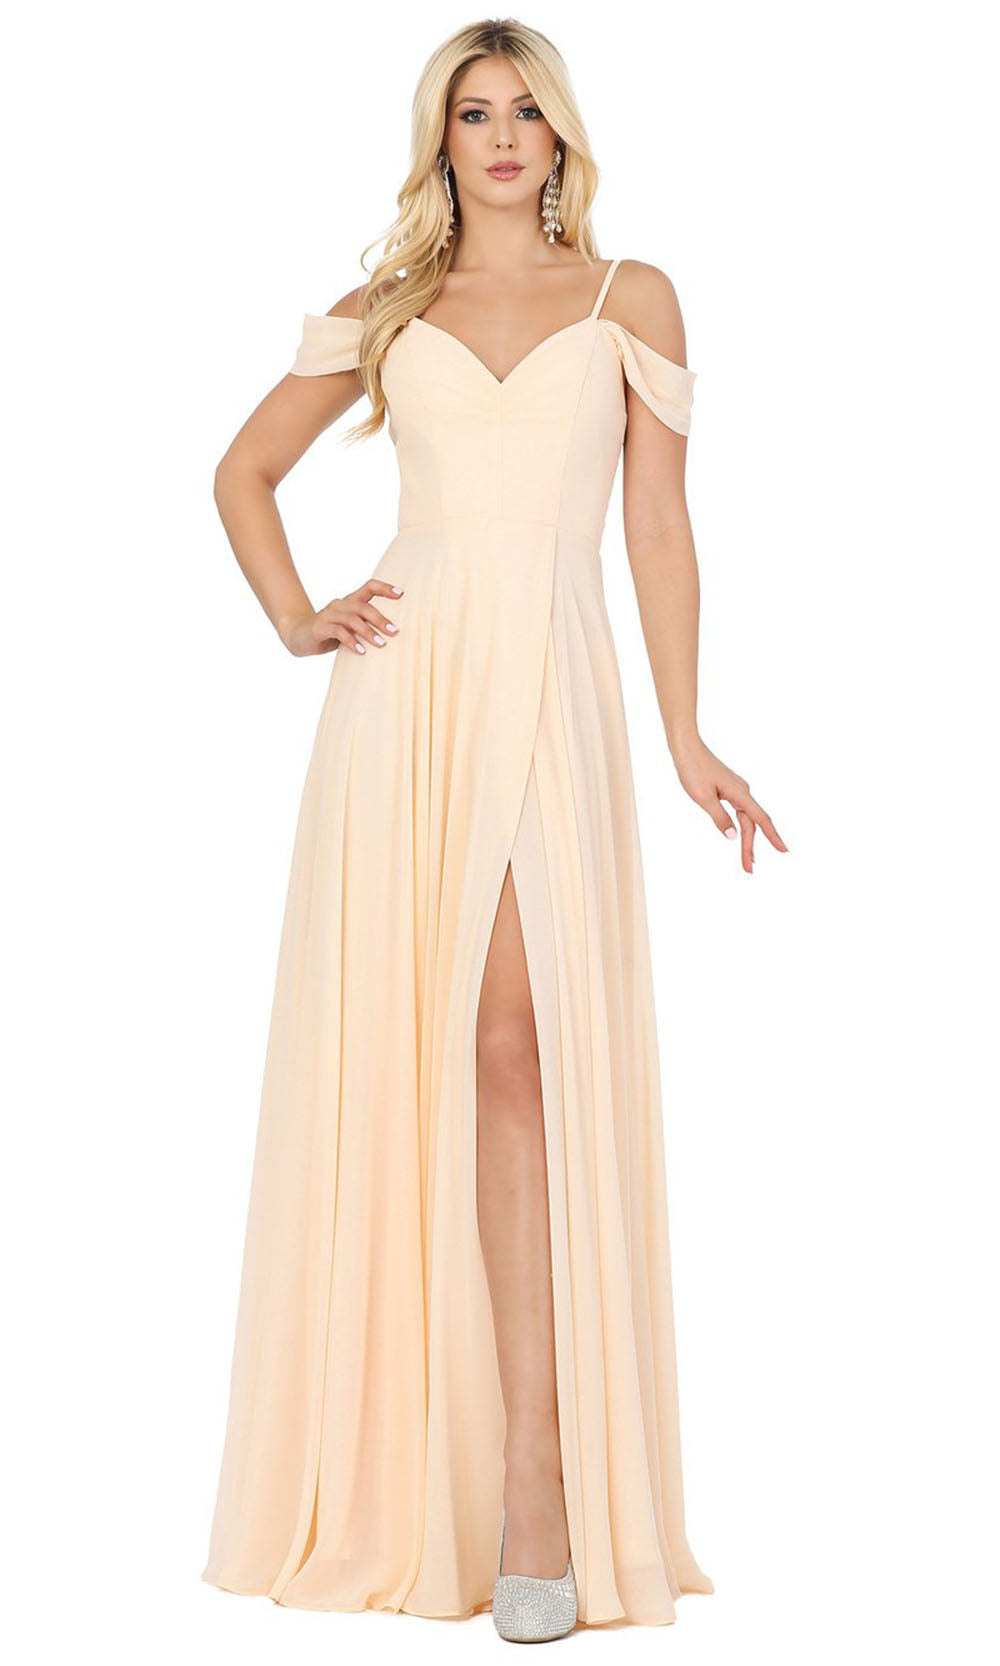 Dancing Queen - 2961 Sheer Lace Back Cold-Shoulders A-Line Gown In Champagne & Gold